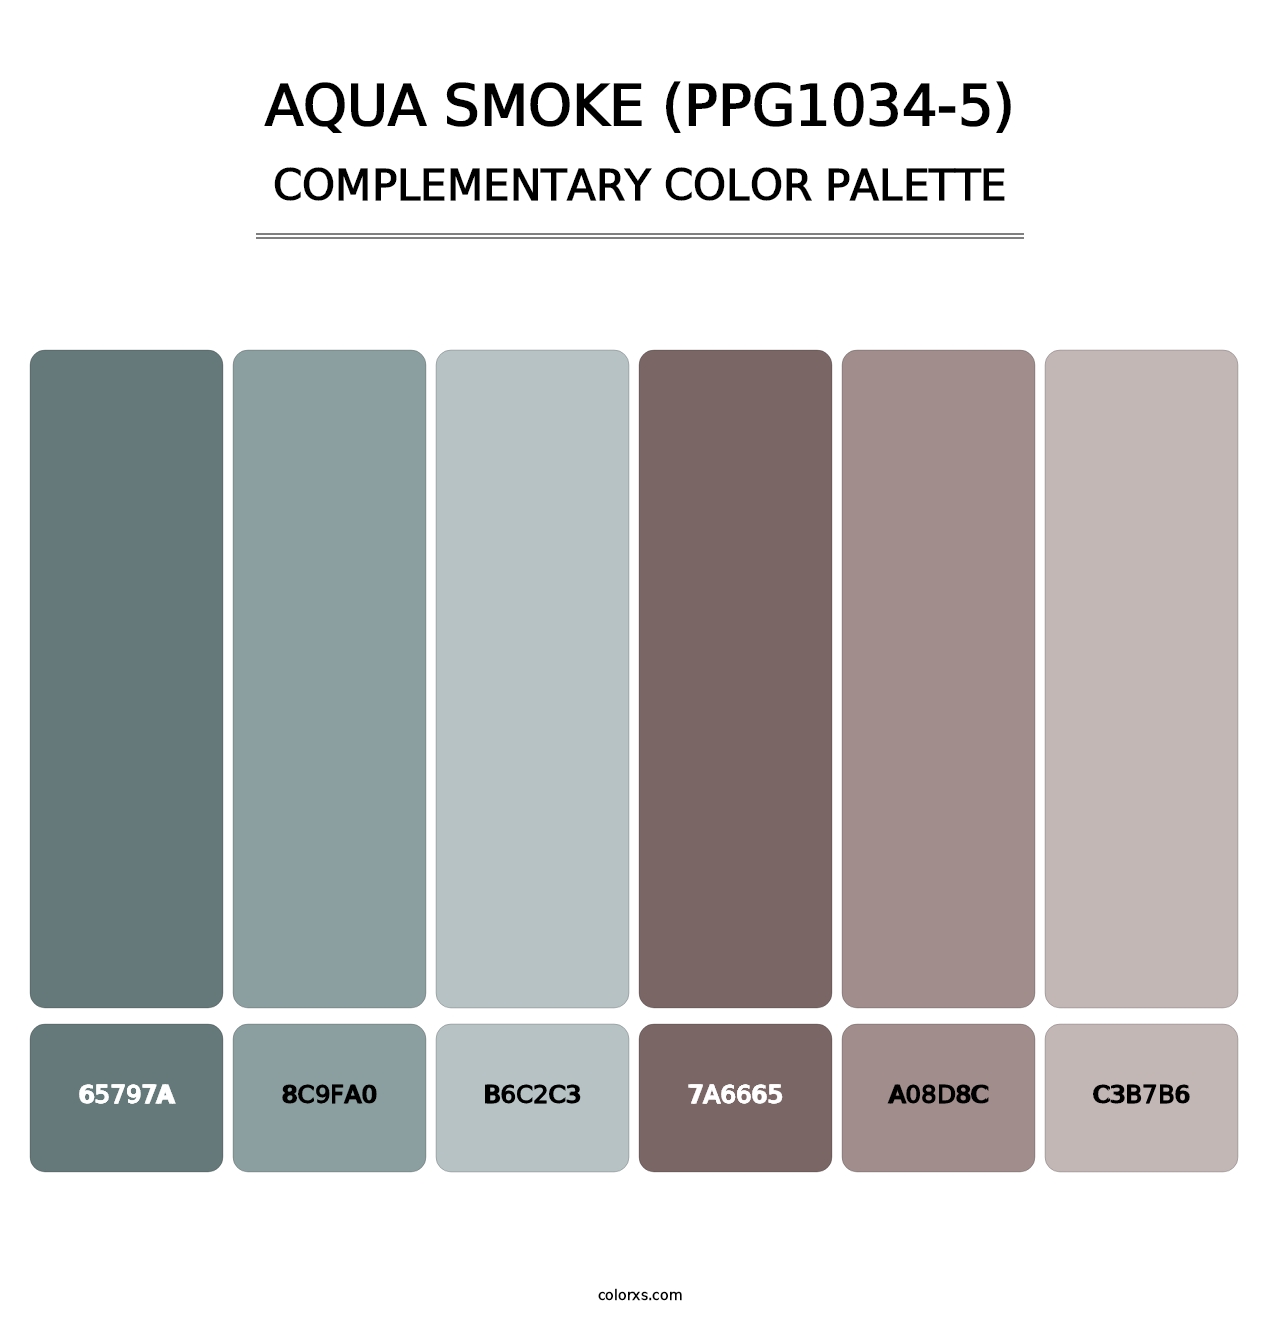 Aqua Smoke (PPG1034-5) - Complementary Color Palette